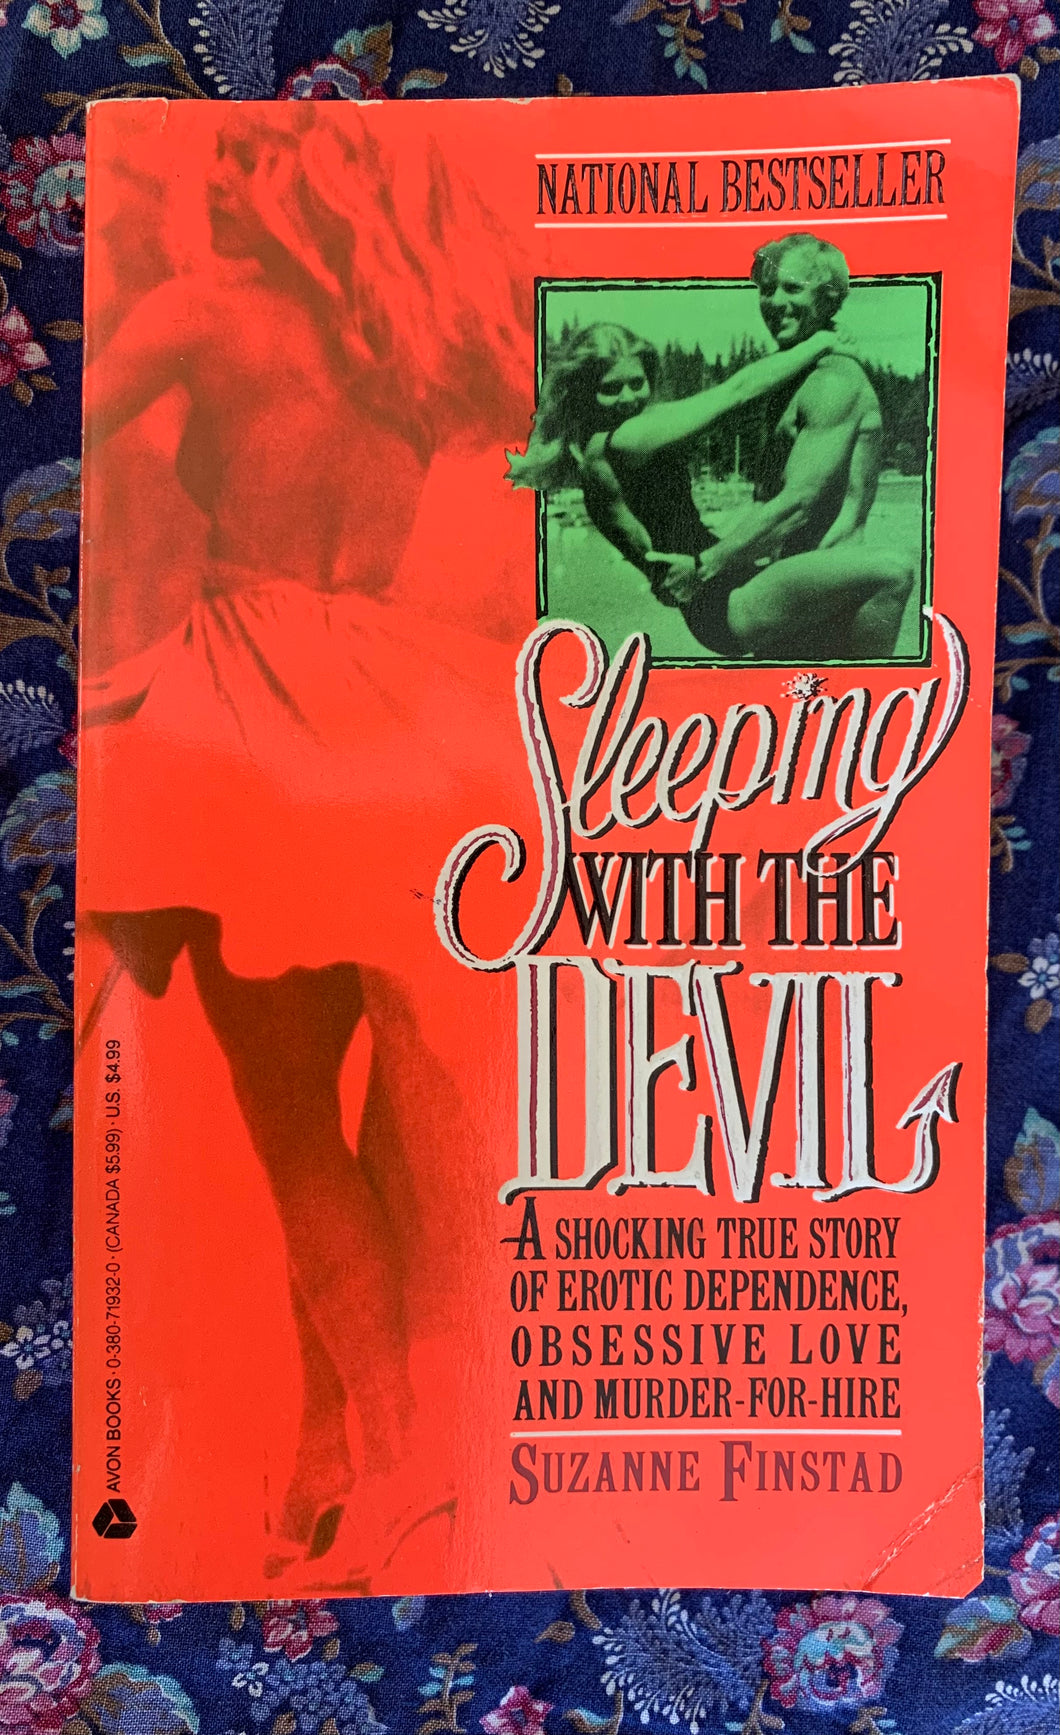 Sleeping with the Devil: A Shocking True Story of Erotic Dependence, Obsessive Love and Murder-For-Hire